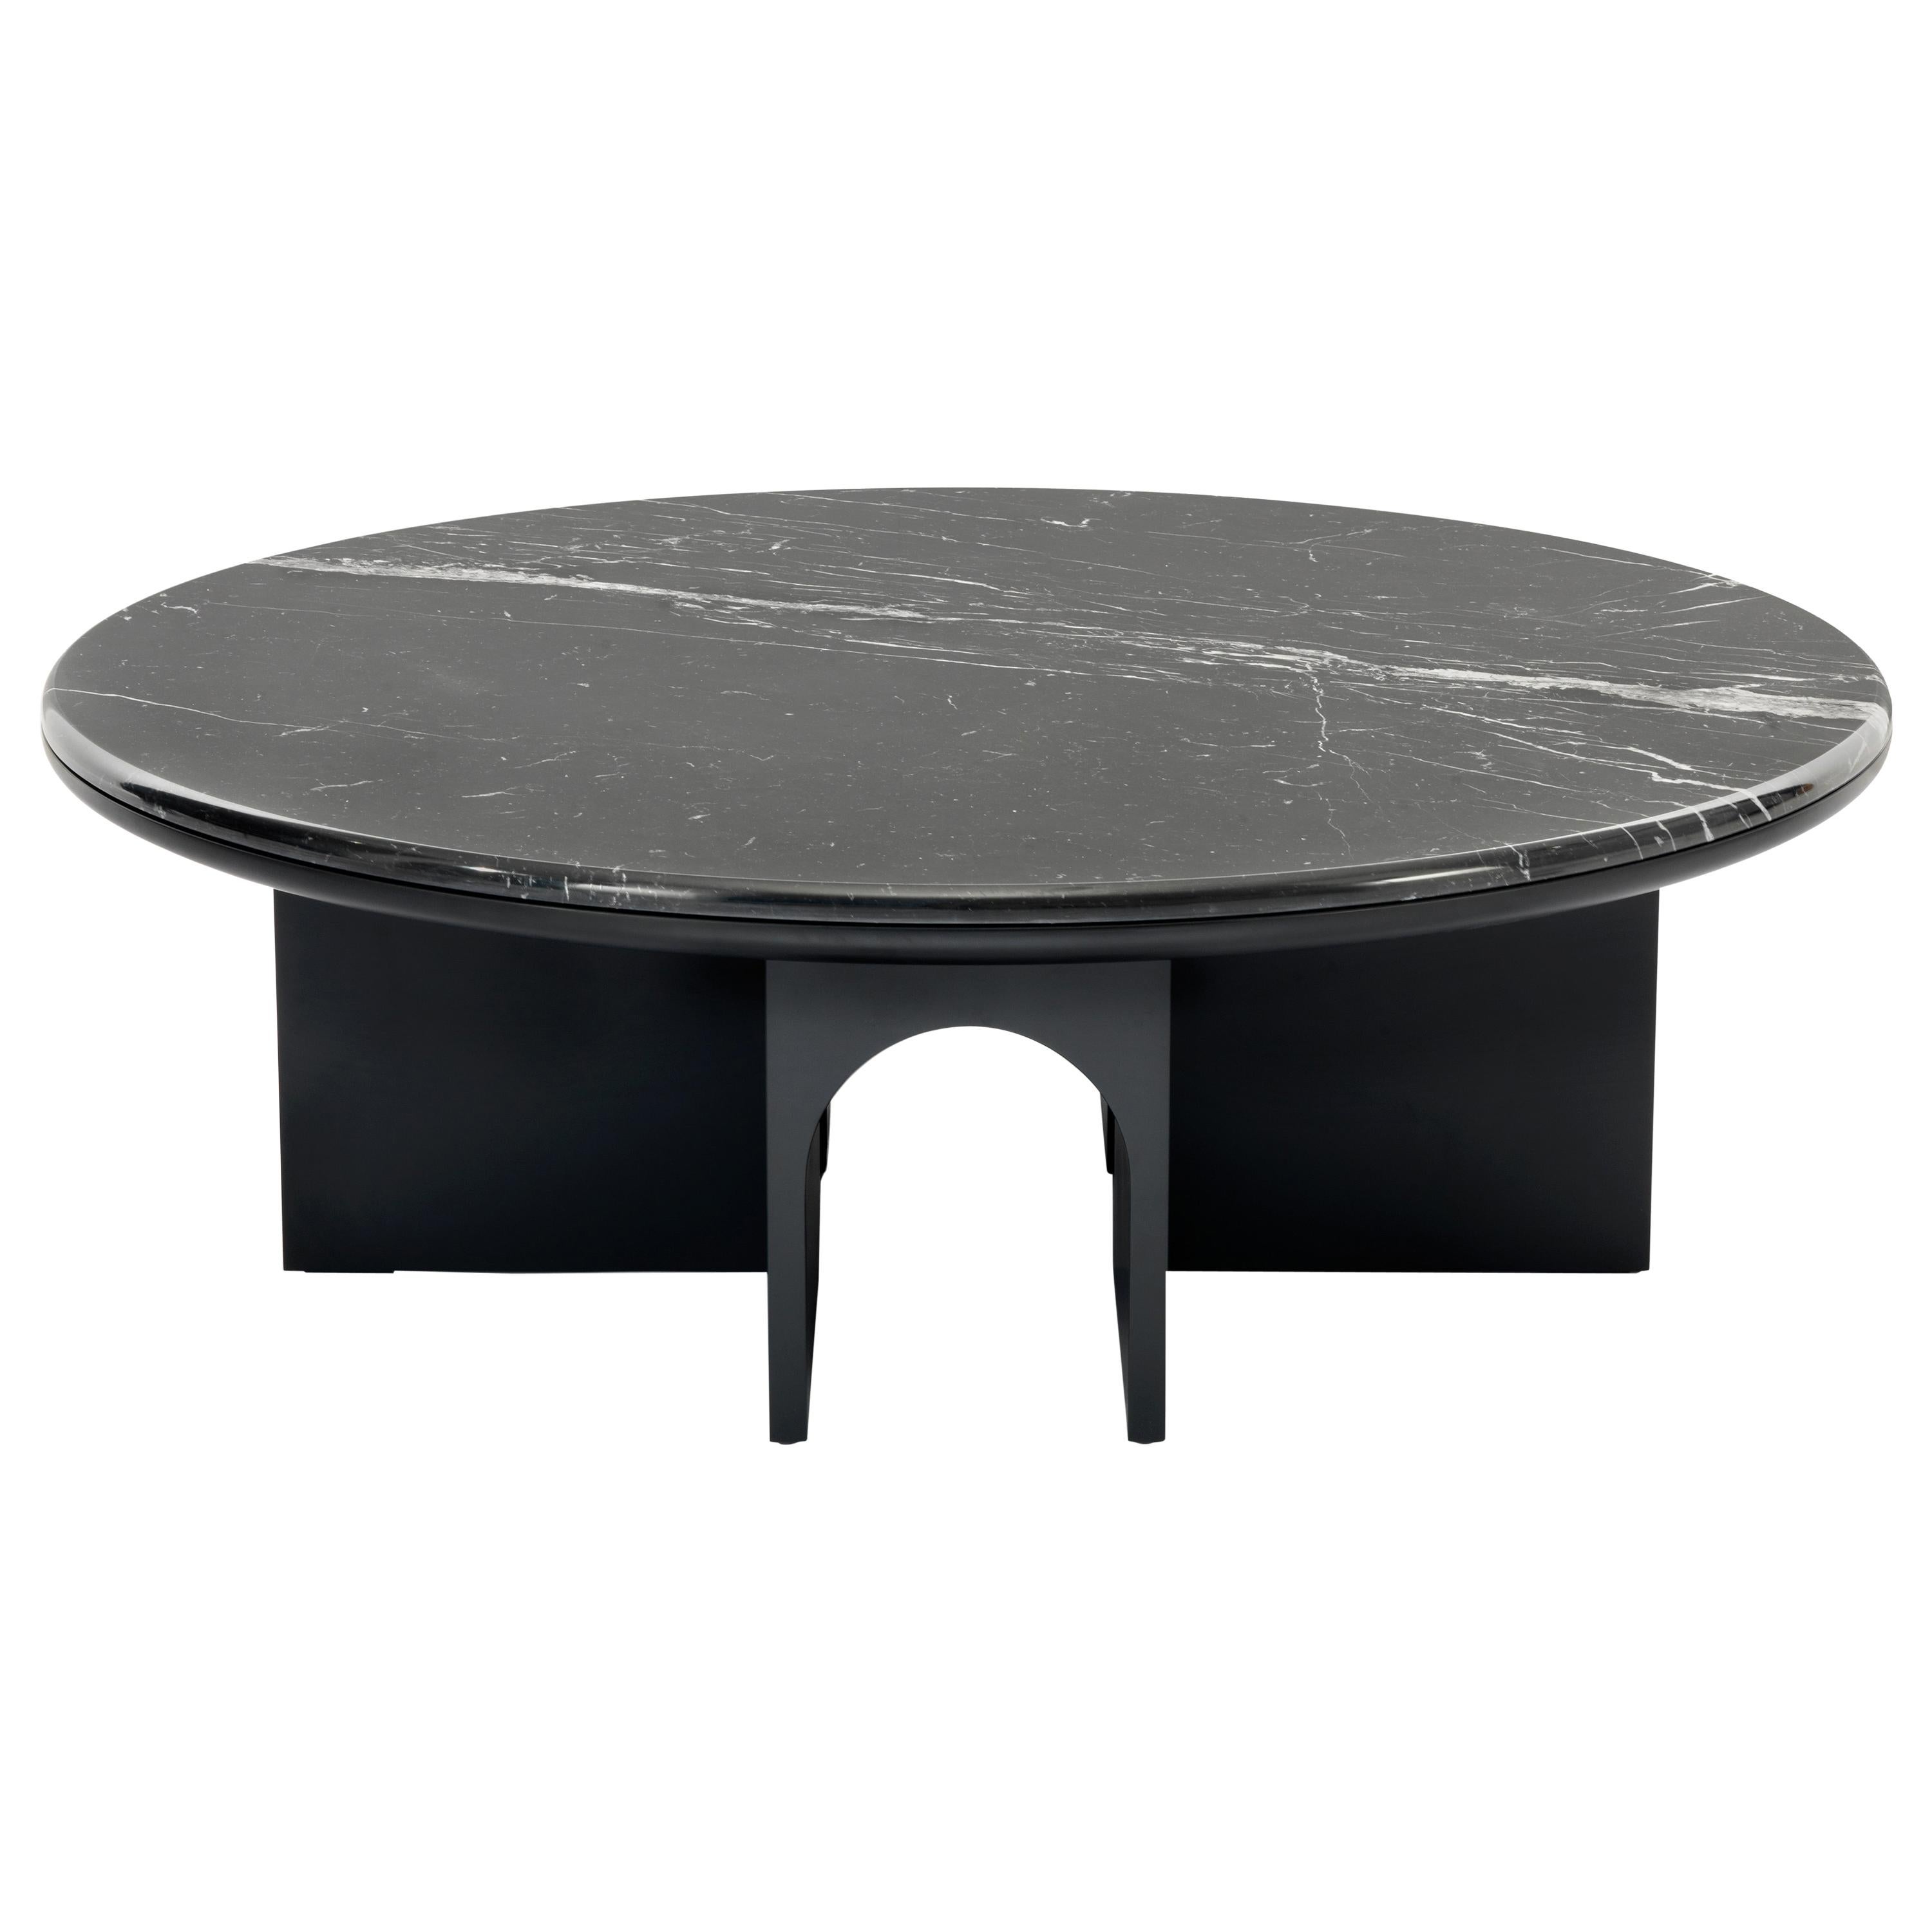 Arflex Arcolor 100cm Small Table in Black Marquinia Marble Top by Jaime Hayon For Sale